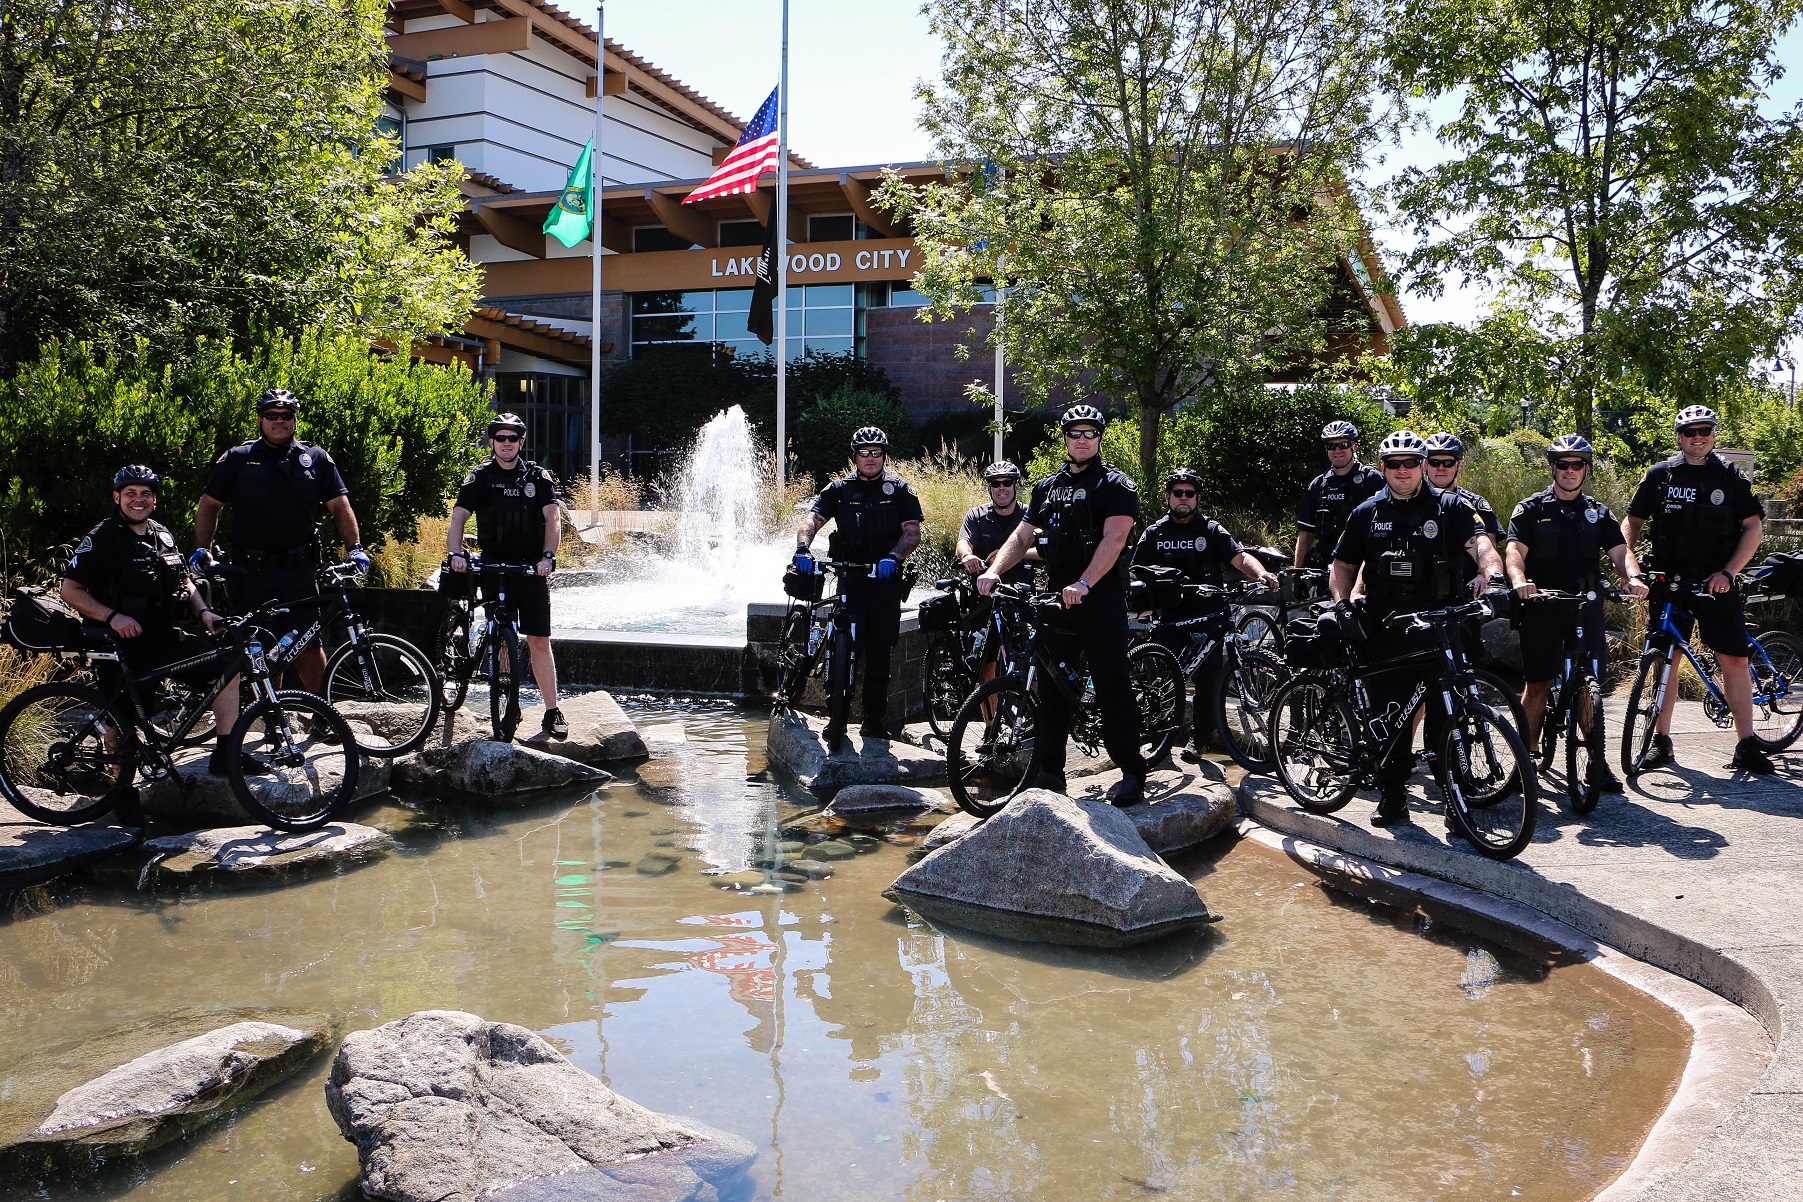 Lakewood Police Bicycle Officers pose for a photo in front of Lakewood City Hall.